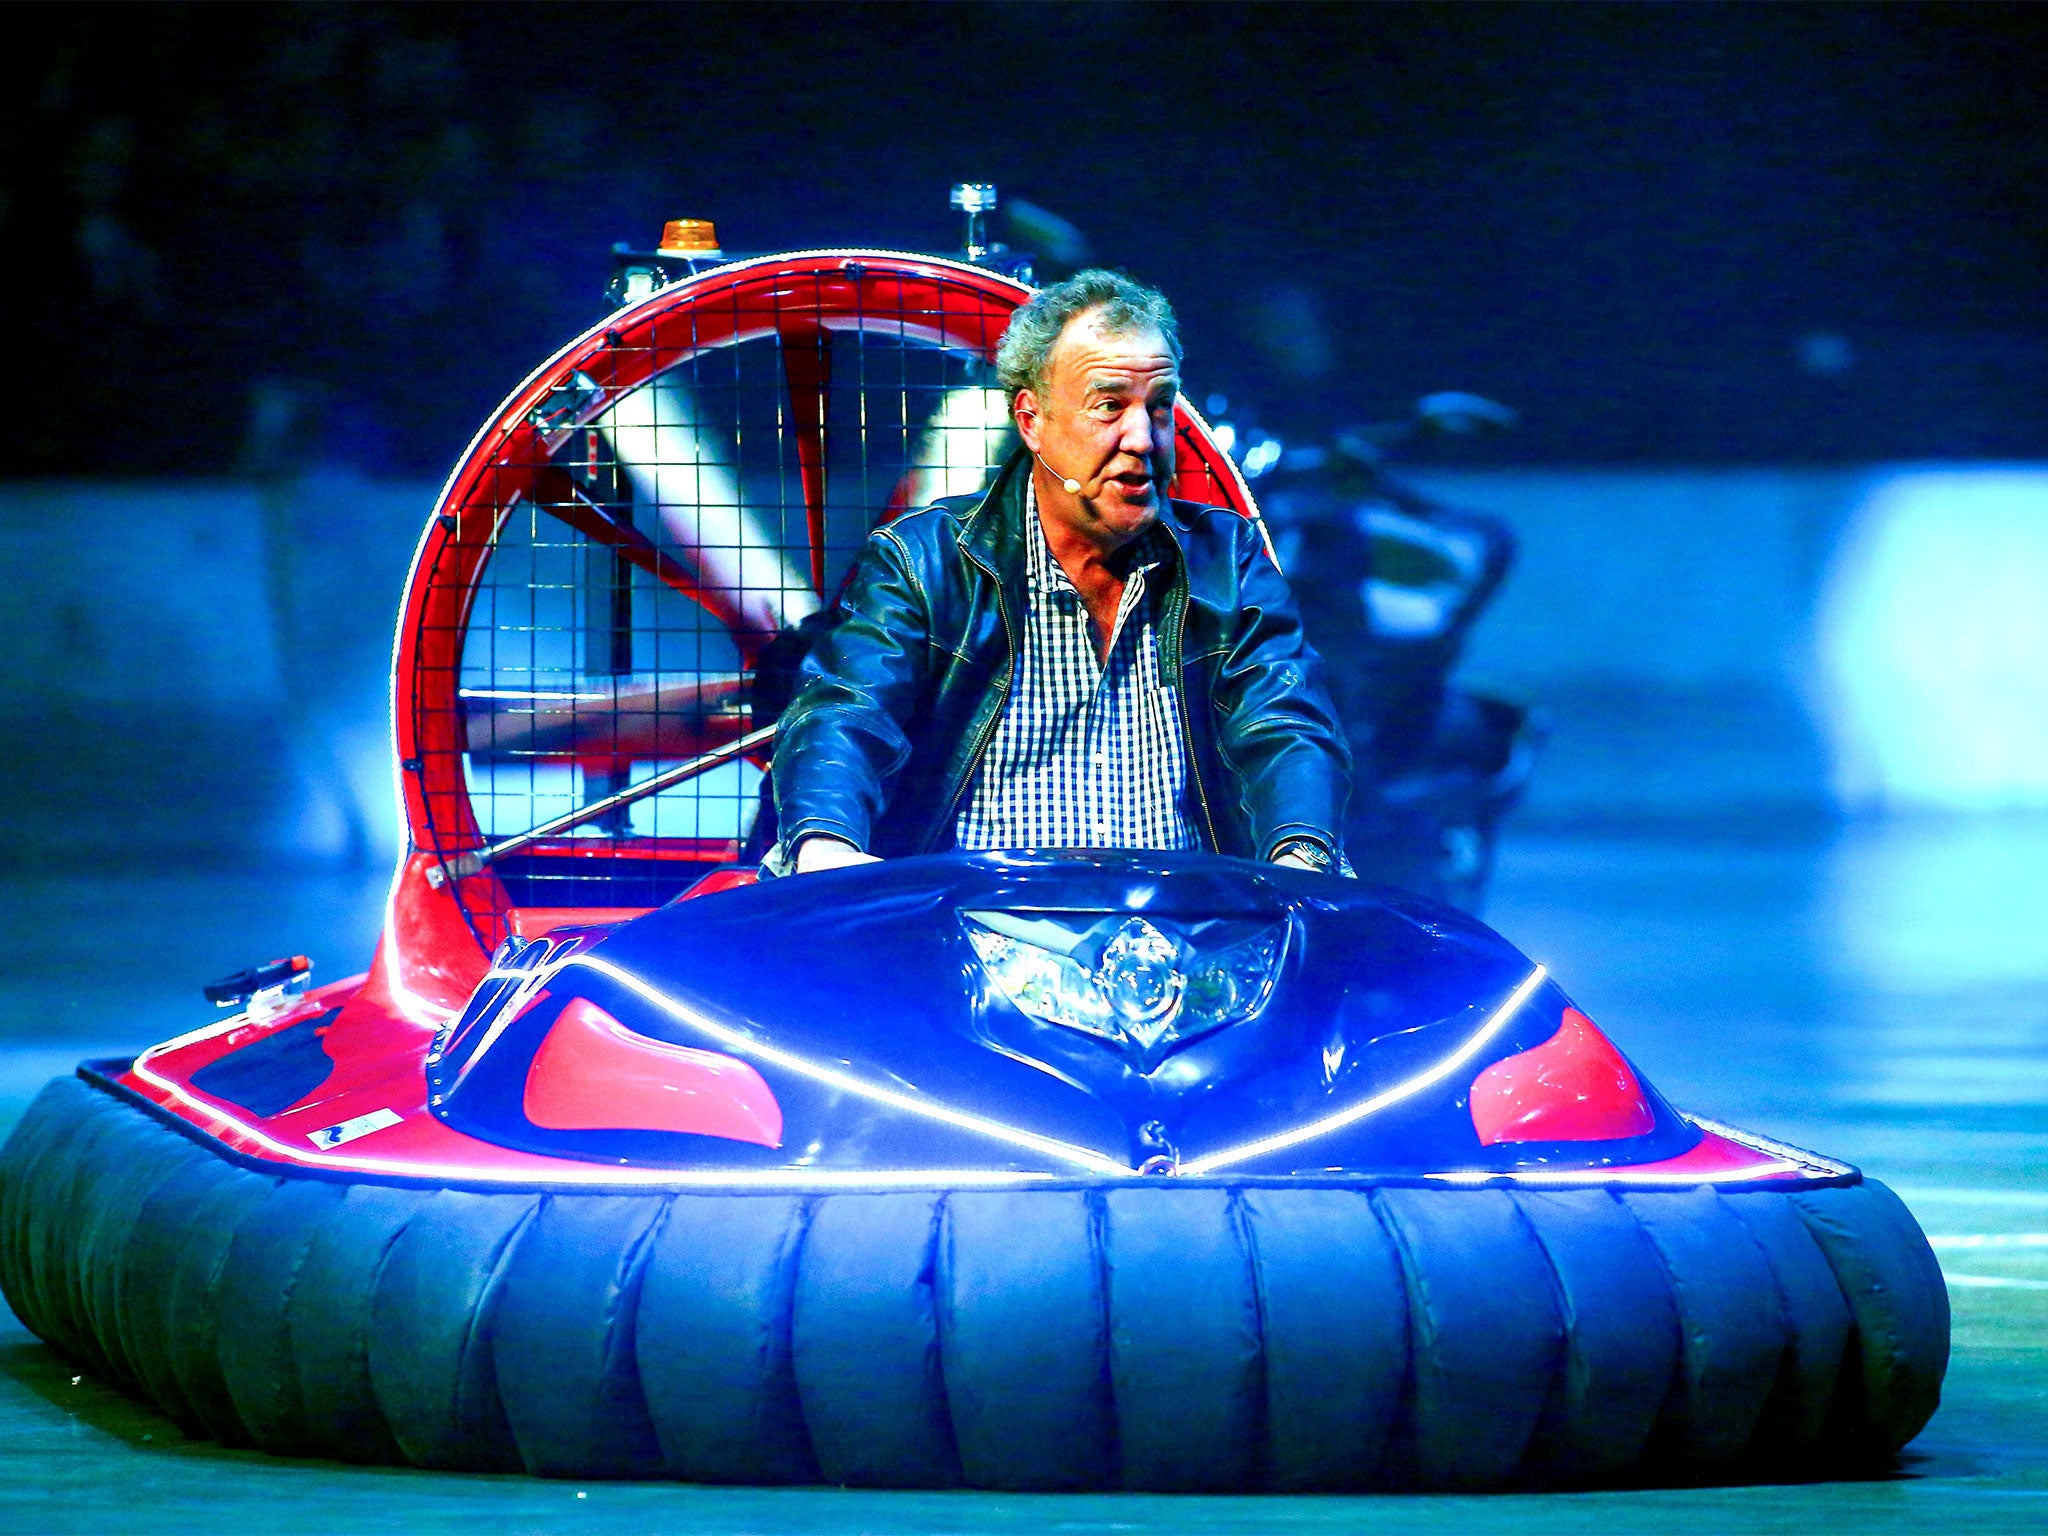 He's back! Clarkson enters the arena on a hovercraft